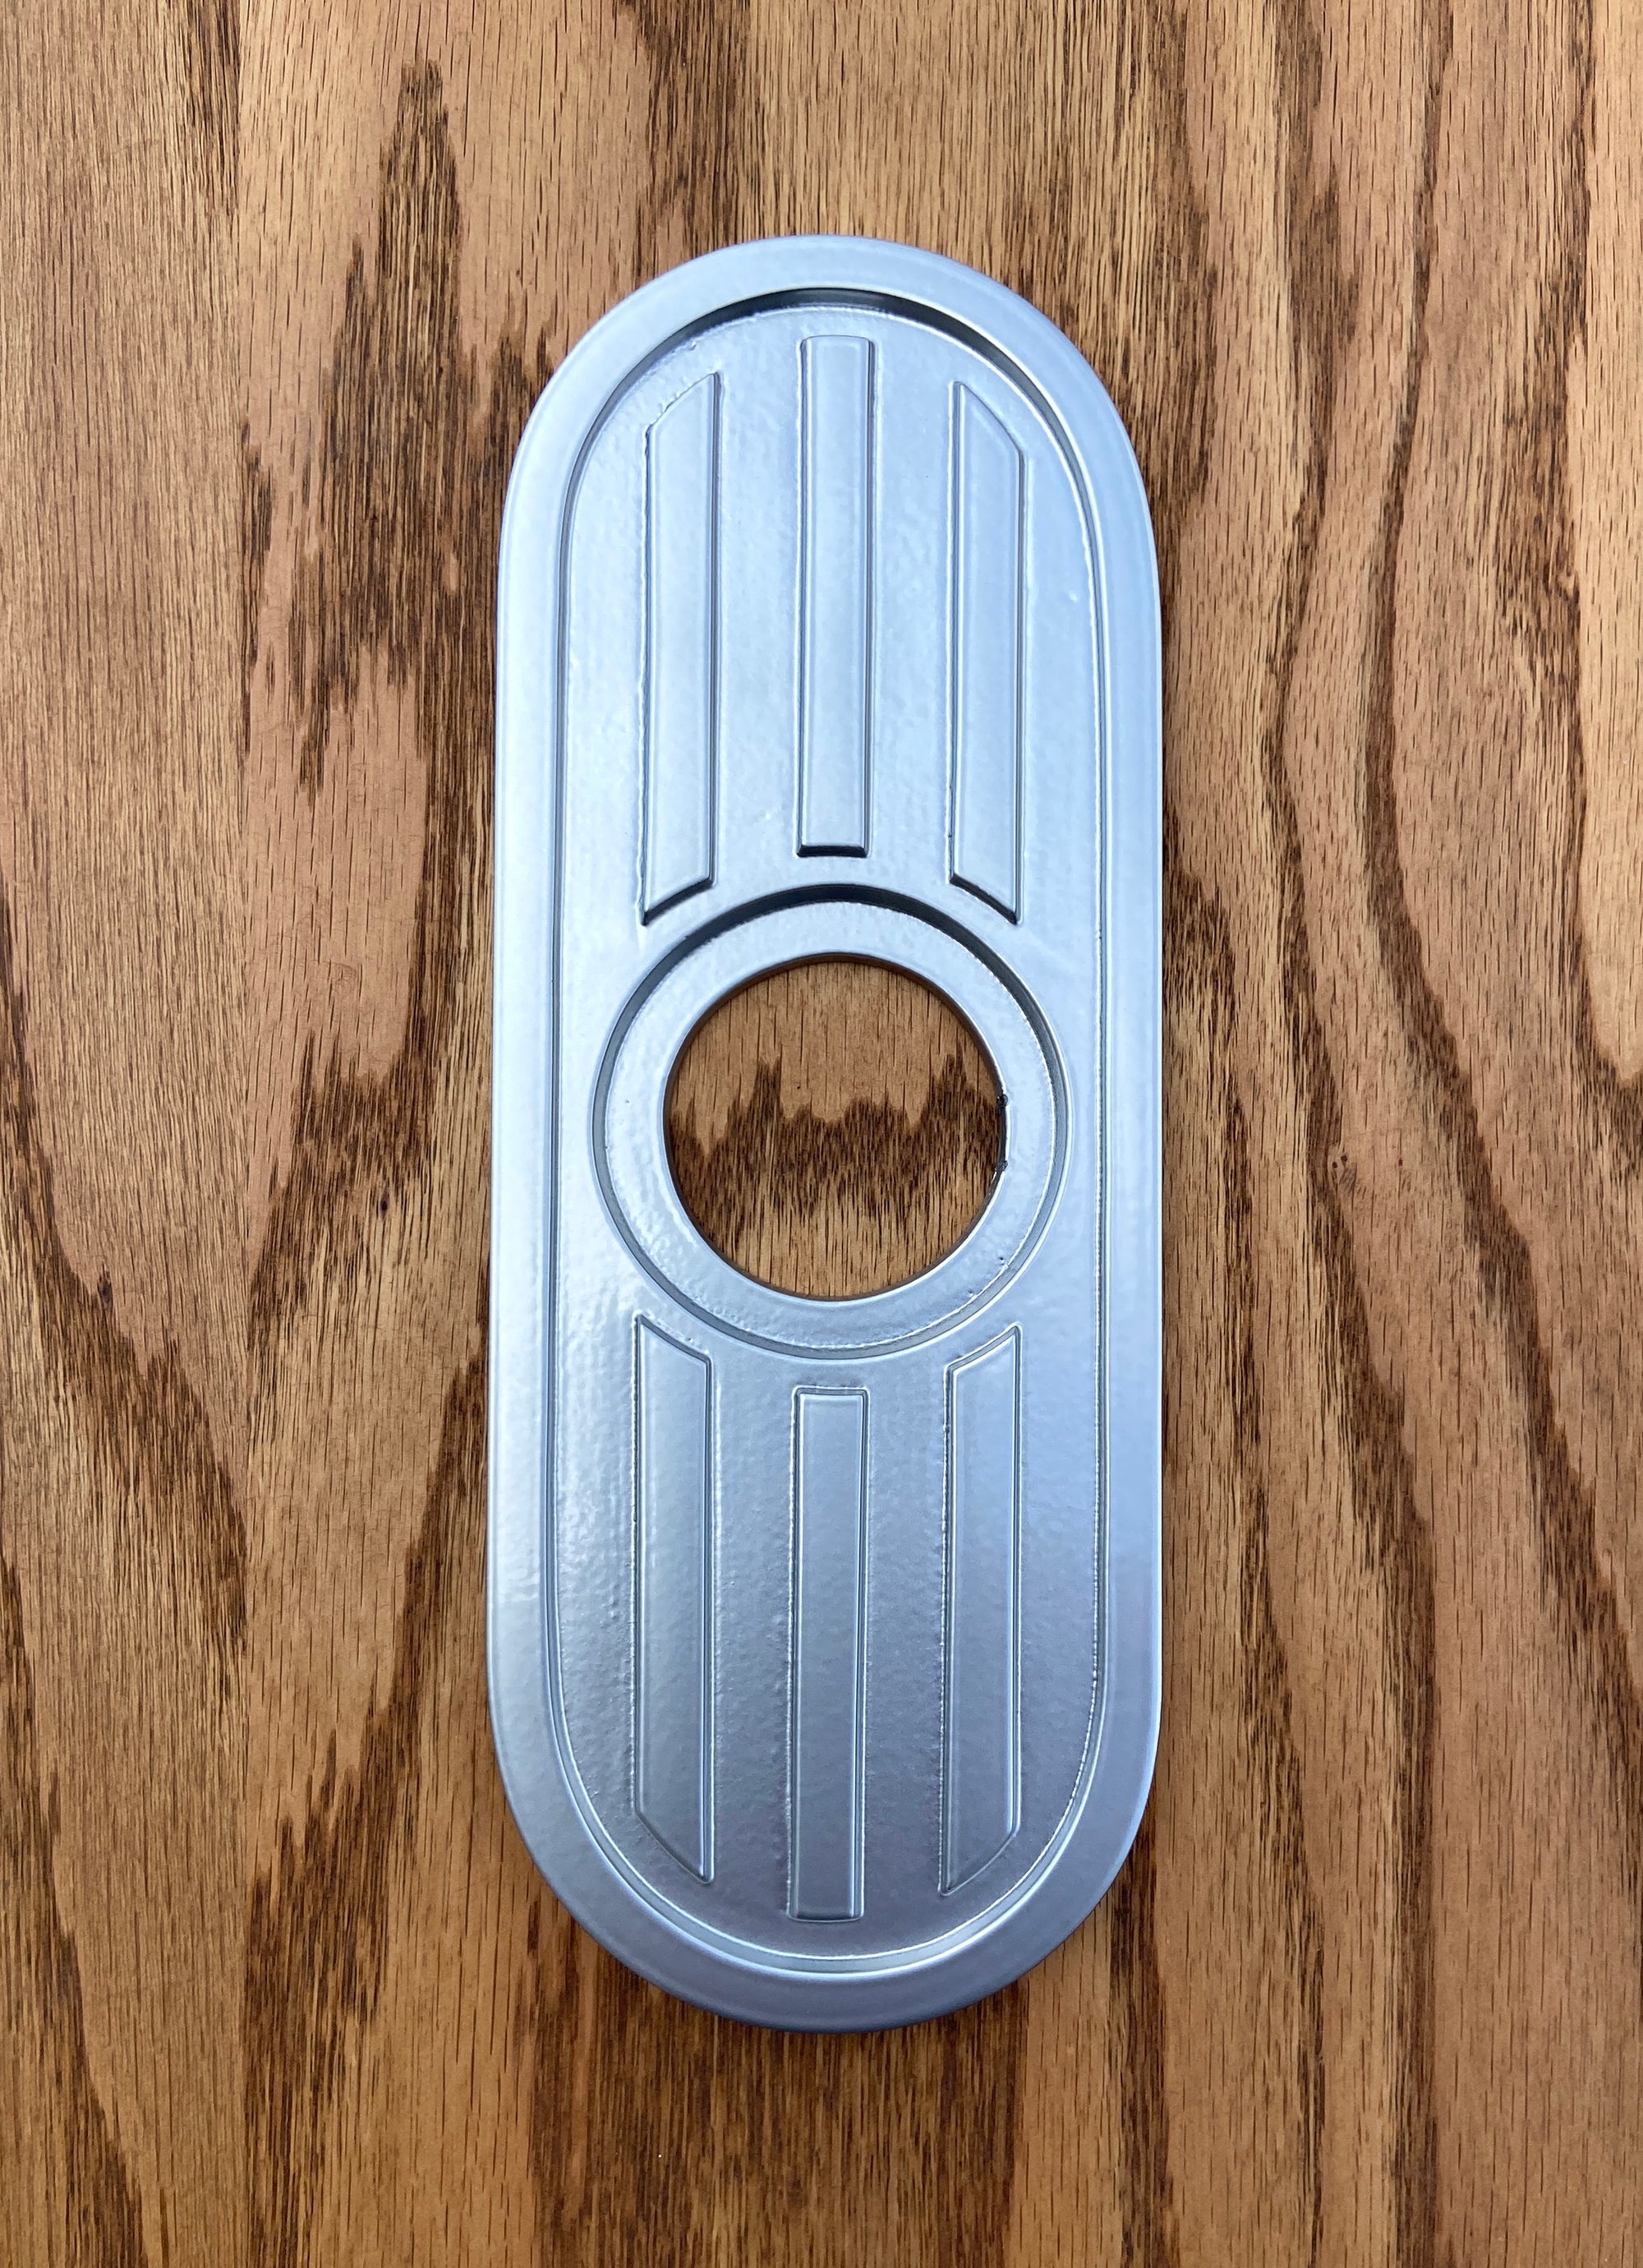 Silver powder coated escutcheon. The silver powder coating is very smooth witha bit of gloss to it. It is a light metallic silver color that shines in the light.